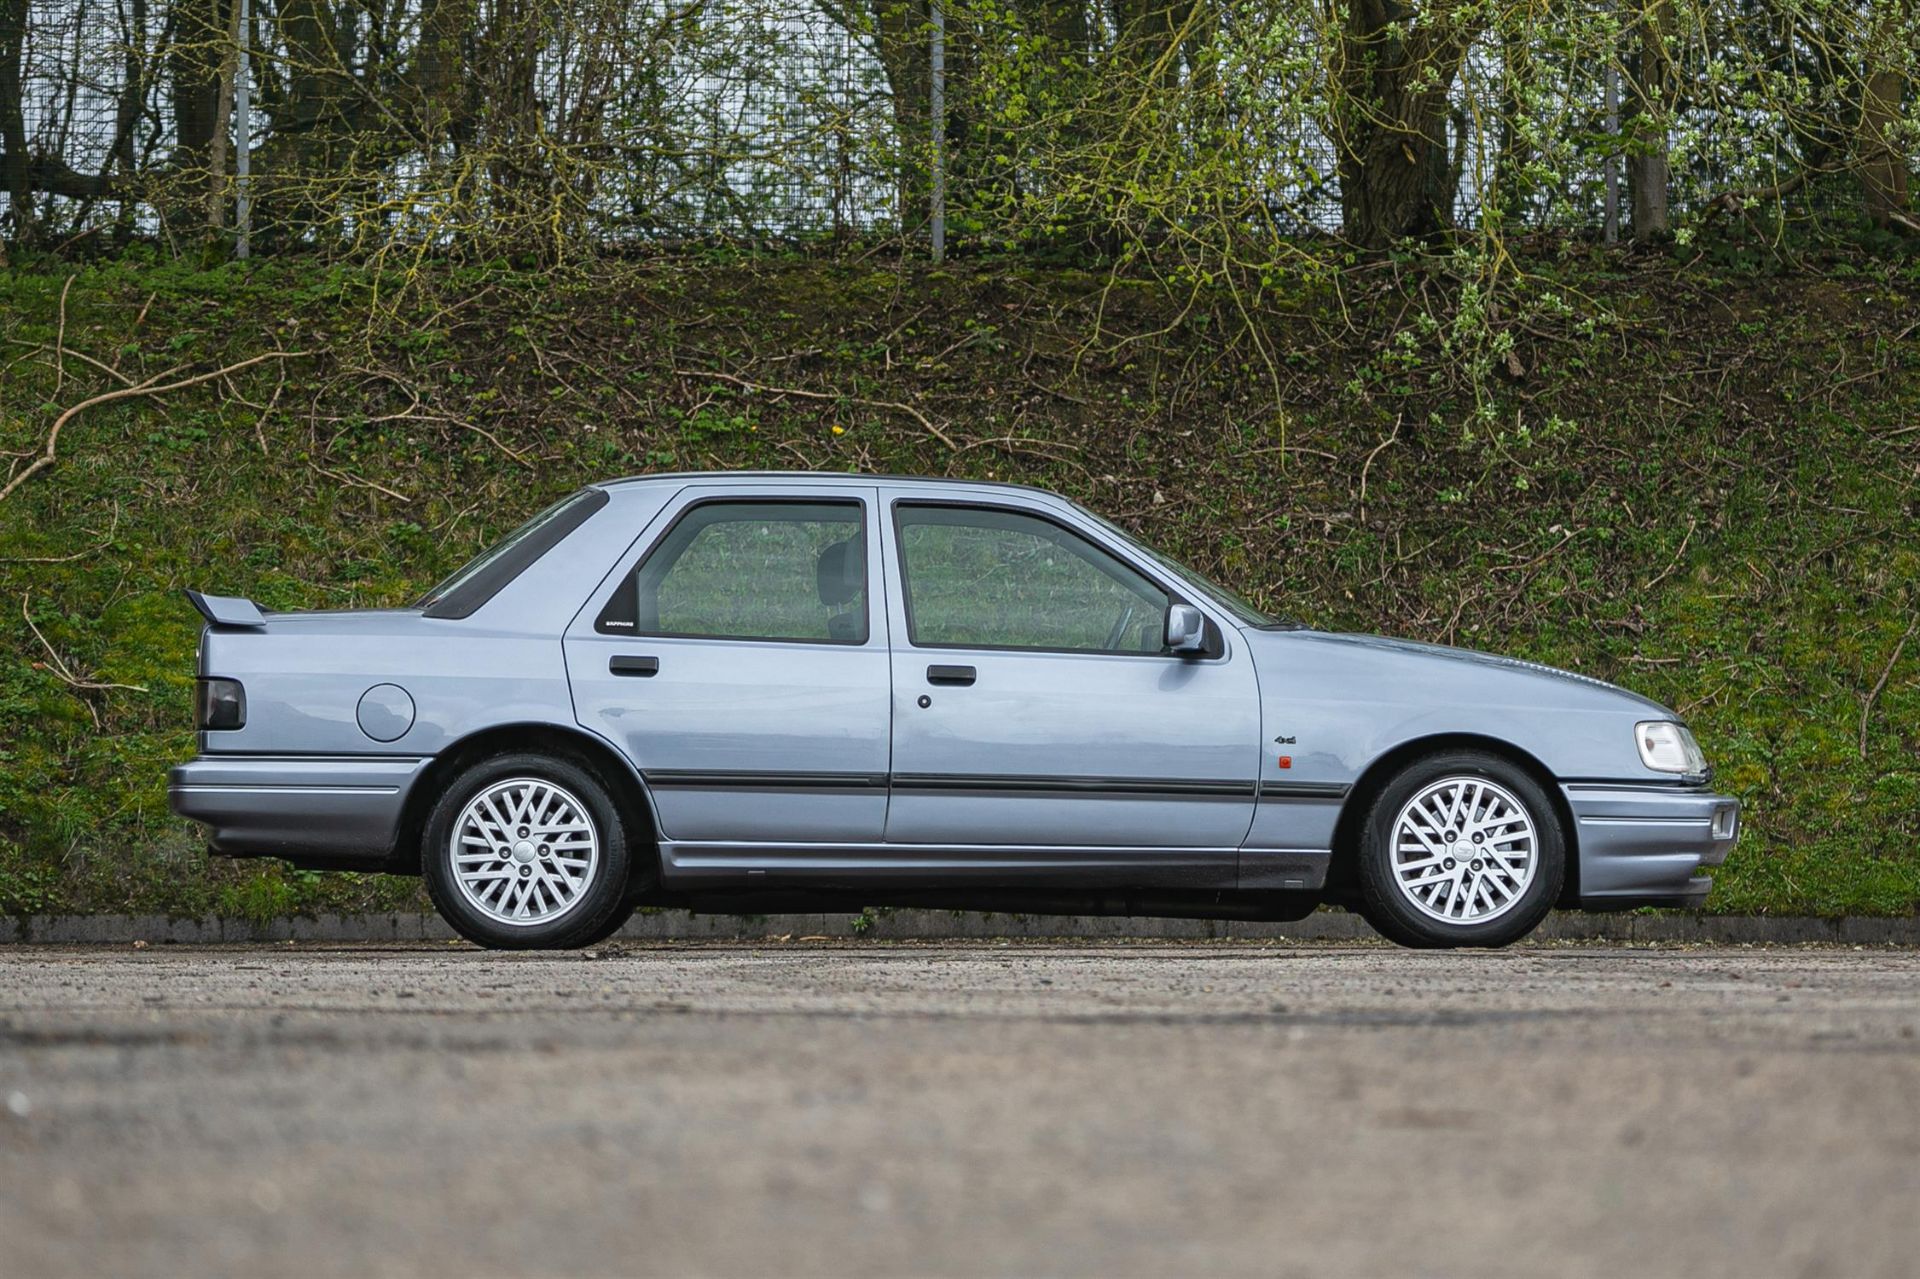 1990 Ford Sierra Sapphire RS Cosworth 4x4 - ex-Press Car - Image 5 of 10